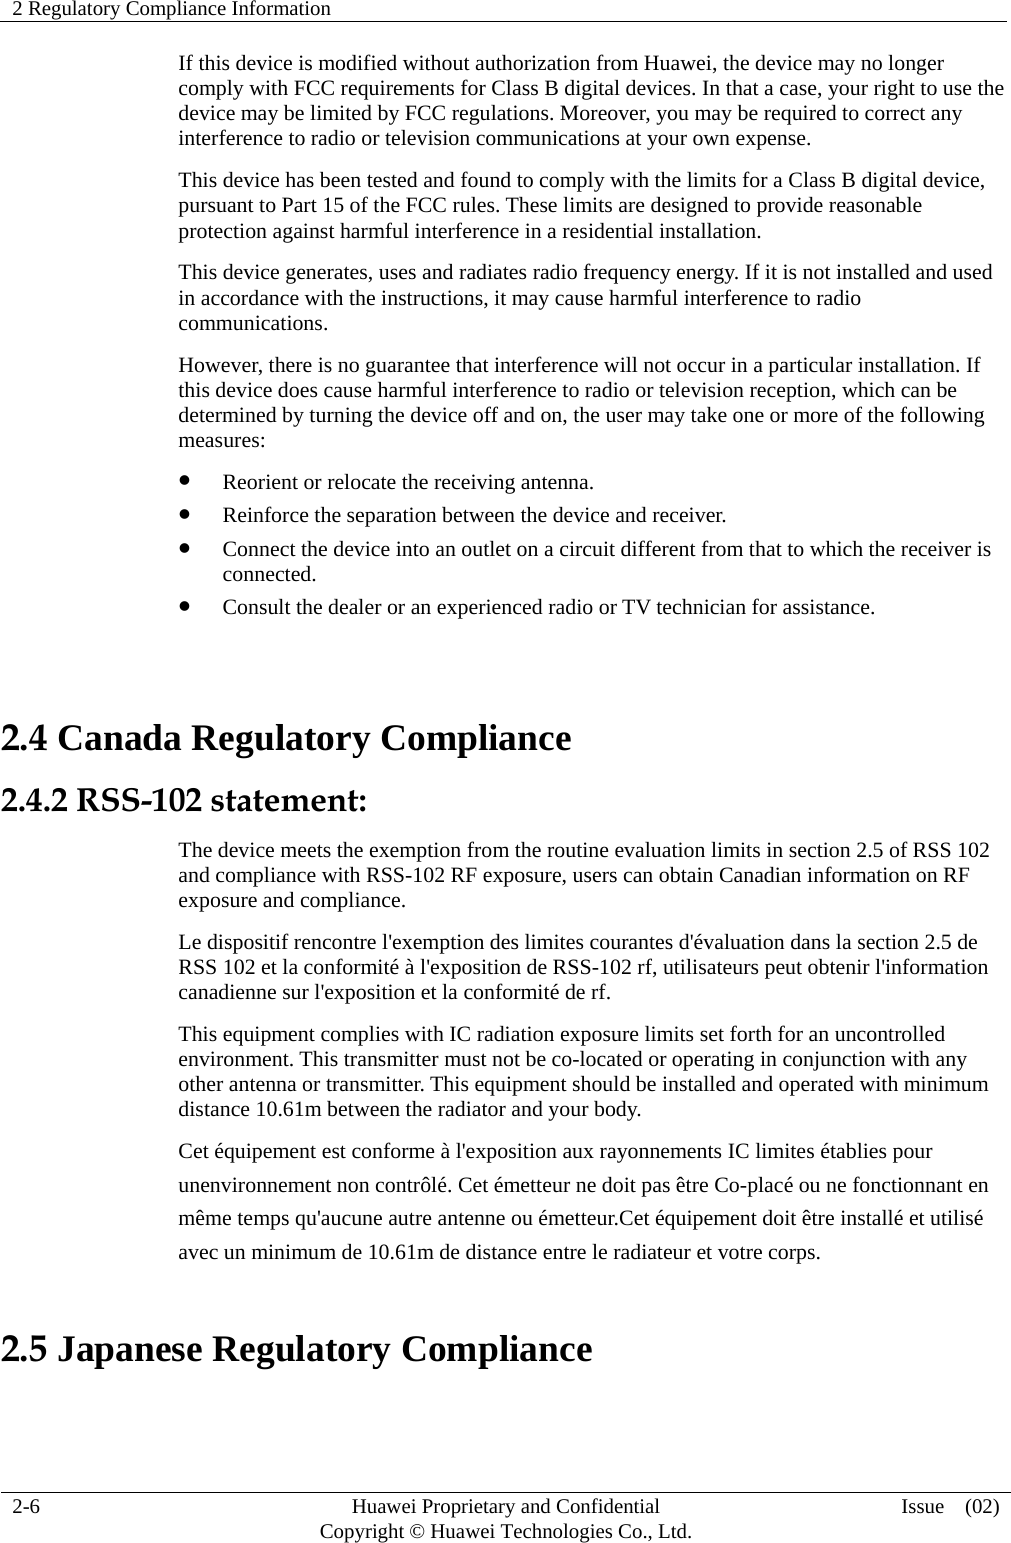 2 Regulatory Compliance Information     2-6  Huawei Proprietary and Confidential         Copyright © Huawei Technologies Co., Ltd.  Issue  (02)  If this device is modified without authorization from Huawei, the device may no longer comply with FCC requirements for Class B digital devices. In that a case, your right to use the device may be limited by FCC regulations. Moreover, you may be required to correct any interference to radio or television communications at your own expense. This device has been tested and found to comply with the limits for a Class B digital device, pursuant to Part 15 of the FCC rules. These limits are designed to provide reasonable protection against harmful interference in a residential installation. This device generates, uses and radiates radio frequency energy. If it is not installed and used in accordance with the instructions, it may cause harmful interference to radio communications. However, there is no guarantee that interference will not occur in a particular installation. If this device does cause harmful interference to radio or television reception, which can be determined by turning the device off and on, the user may take one or more of the following measures:  Reorient or relocate the receiving antenna.  Reinforce the separation between the device and receiver.  Connect the device into an outlet on a circuit different from that to which the receiver is connected.  Consult the dealer or an experienced radio or TV technician for assistance.  2.4 Canada Regulatory Compliance 2.4.2 RSS-102 statement: The device meets the exemption from the routine evaluation limits in section 2.5 of RSS 102 and compliance with RSS-102 RF exposure, users can obtain Canadian information on RF exposure and compliance.   Le dispositif rencontre l&apos;exemption des limites courantes d&apos;évaluation dans la section 2.5 de RSS 102 et la conformité à l&apos;exposition de RSS-102 rf, utilisateurs peut obtenir l&apos;information canadienne sur l&apos;exposition et la conformité de rf. This equipment complies with IC radiation exposure limits set forth for an uncontrolled environment. This transmitter must not be co-located or operating in conjunction with any other antenna or transmitter. This equipment should be installed and operated with minimum distance 10.61m between the radiator and your body. Cet équipement est conforme à l&apos;exposition aux rayonnements IC limites établies pour   unenvironnement non contrôlé. Cet émetteur ne doit pas être Co-placé ou ne fonctionnant en   même temps qu&apos;aucune autre antenne ou émetteur.Cet équipement doit être installé et utilisé   avec un minimum de 10.61m de distance entre le radiateur et votre corps. 2.5 Japanese Regulatory Compliance  